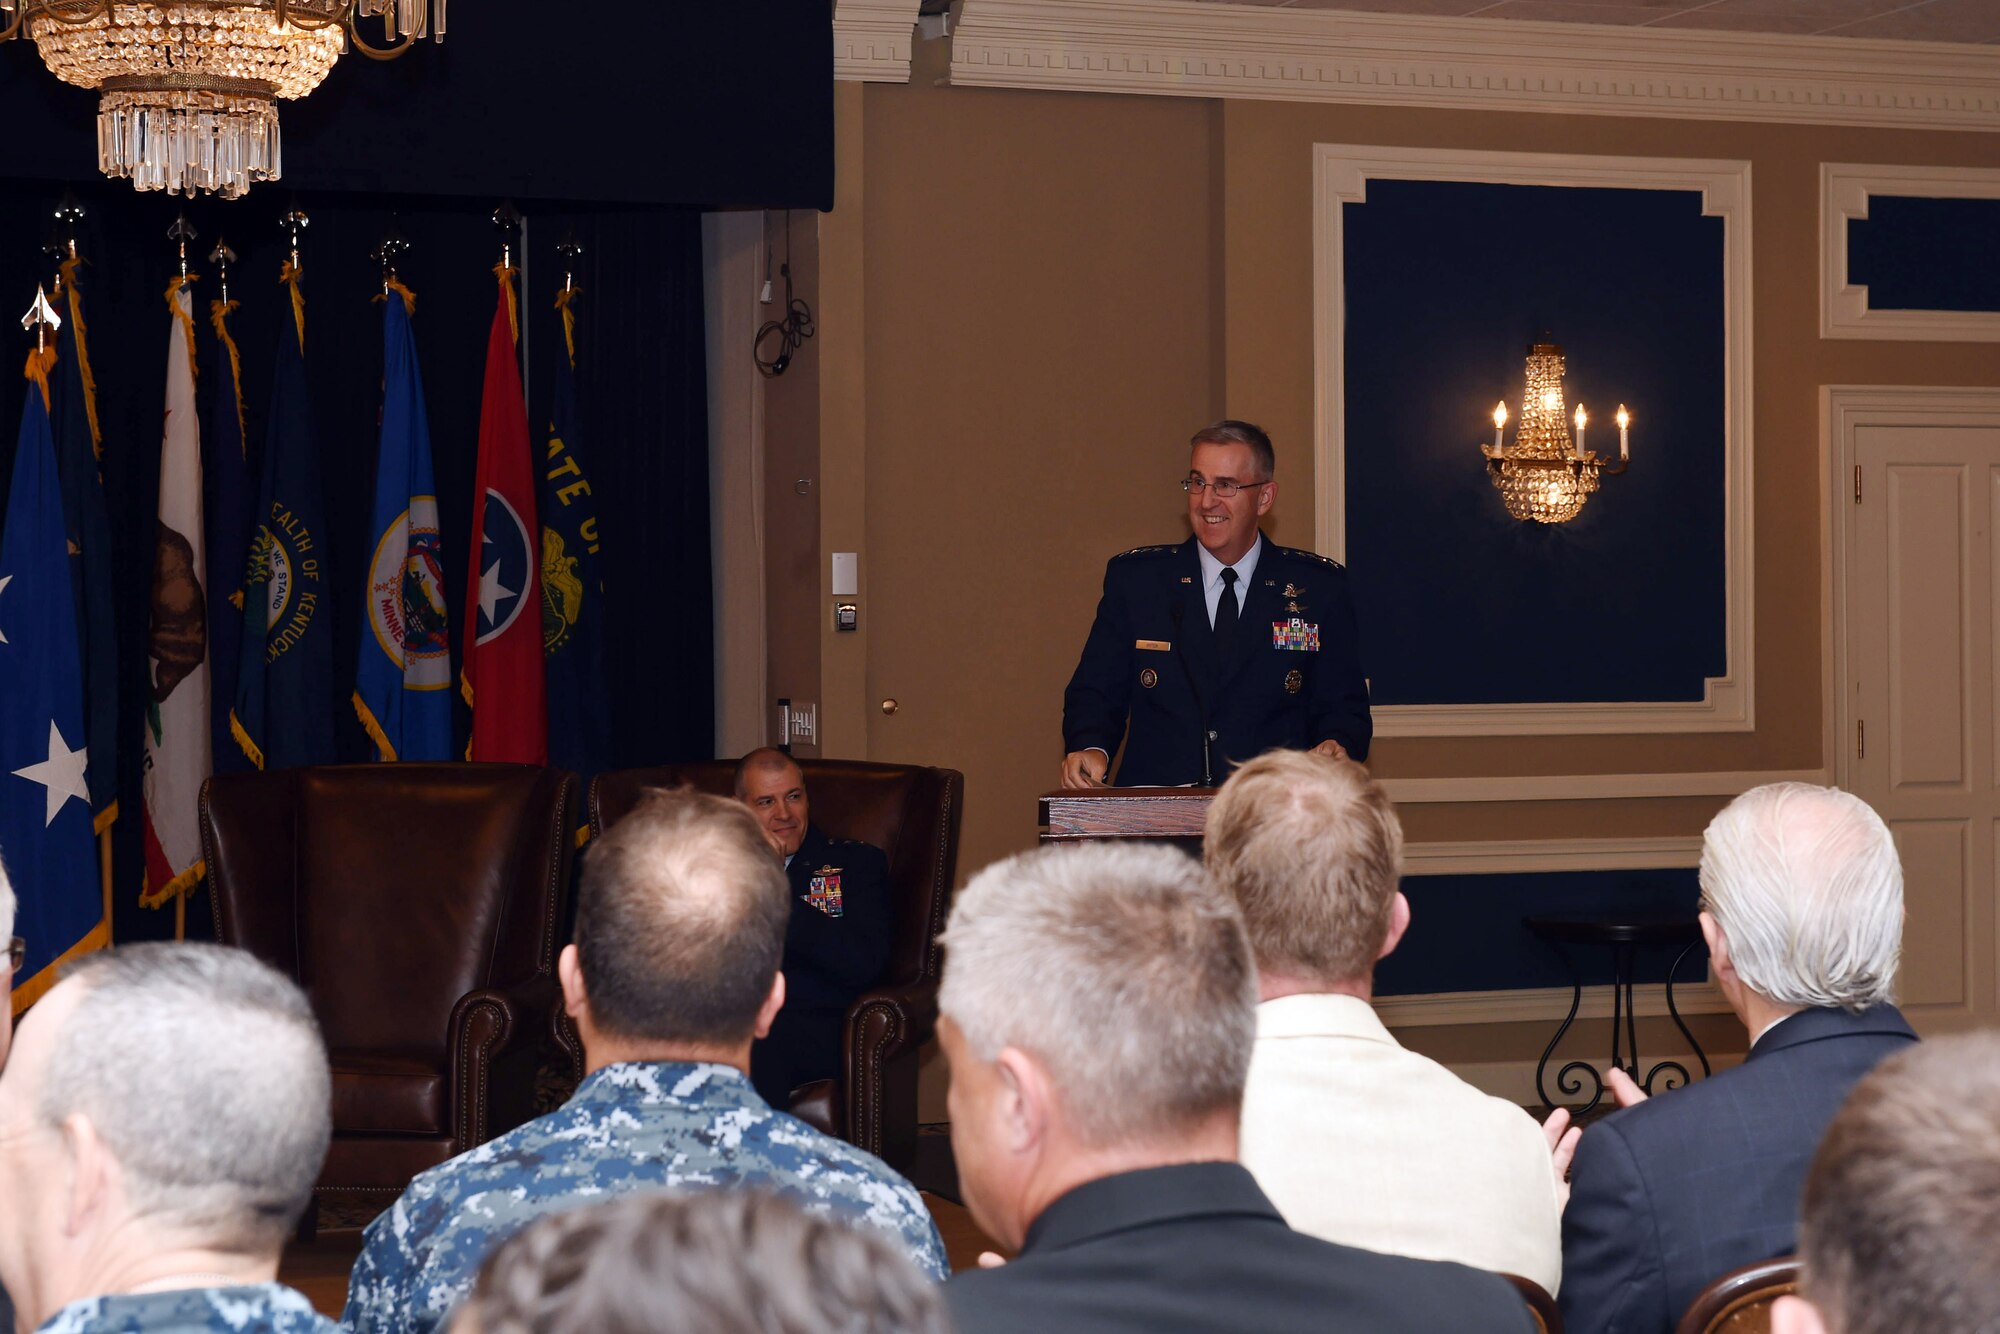 U.S. Air Force Gen. John Hyten, commander of U.S. Strategic Command (USSTRATCOM), presides over the Joint Functional Component Command for Global Strike (JFCC GS) inactivation ceremony at the Patriot Club on Offutt Air Force Base, Neb., Oct. 2, 2017.  USSTRATCOM inactivated JFCC GS as part of the command’s restructure of its components to build a coherent and streamlined warfighting structure. The restructure will enhance integration throughout the deterrence enterprise and more closely match the organizational structure of other warfighting commands.